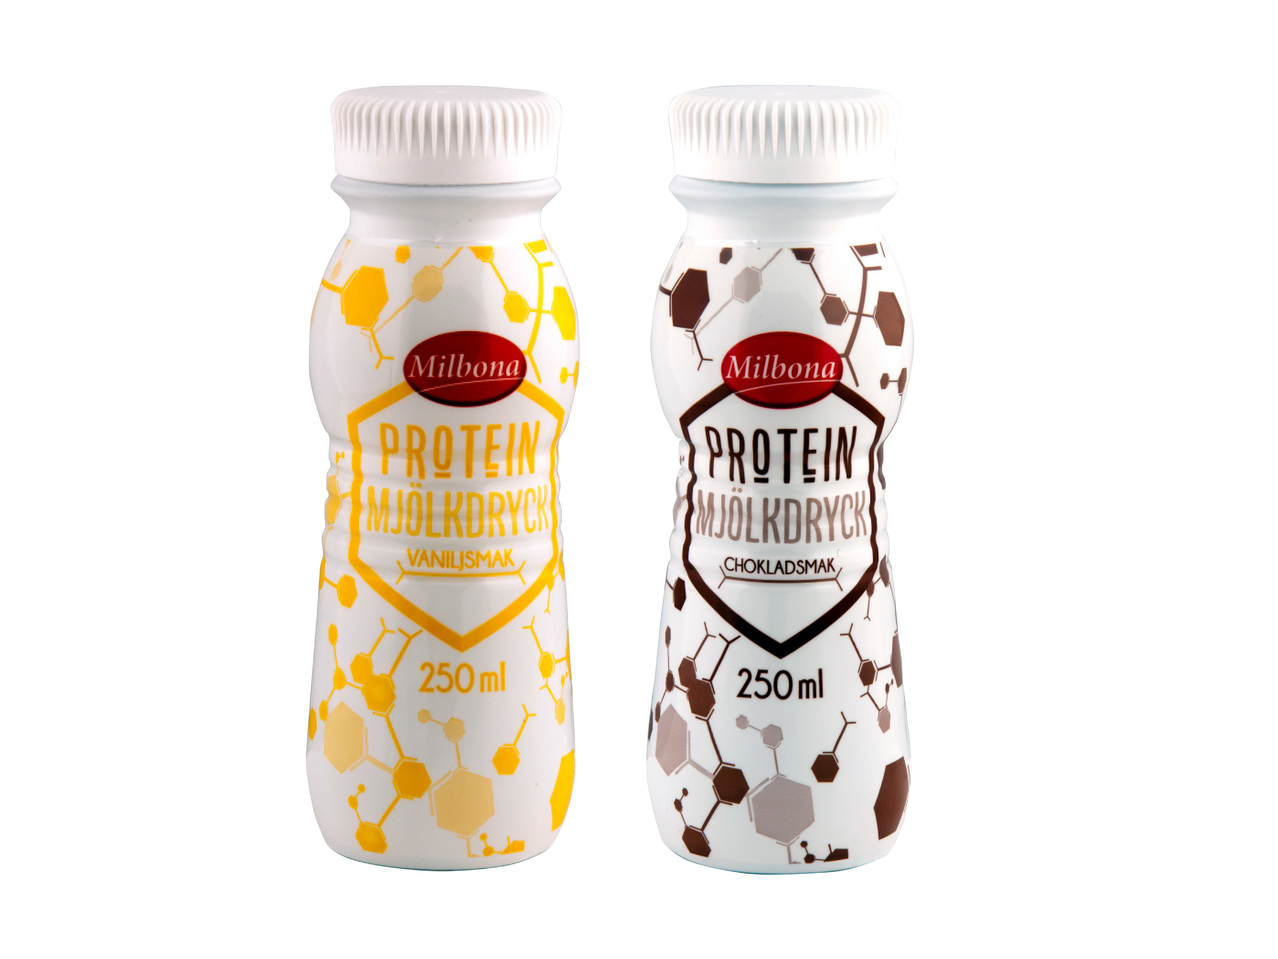 PROTEINDRYCK